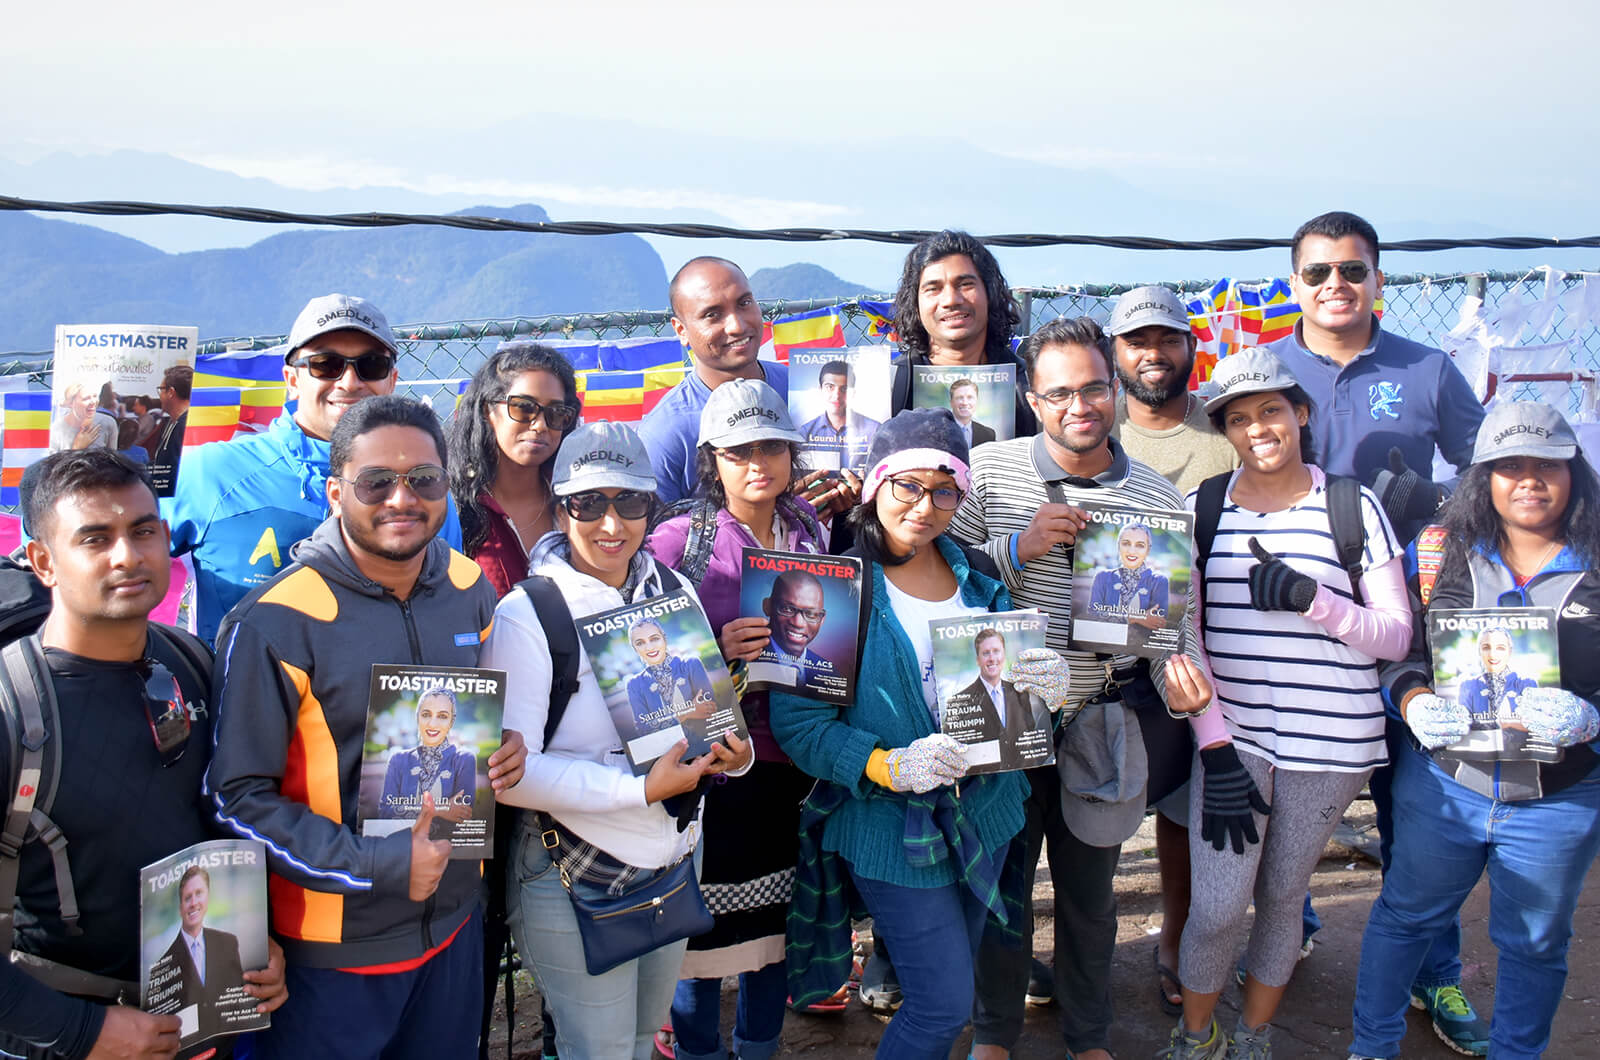 Members of Smedley Toastmasters club in Kalubowila, Dehiwala-Mount Lavinia, Sri Lanka, celebrate their 14th anniversary on the 2,243-meter/7,359-foot Mount Sri Pada (also known as Adam’s Peak) in Sabaragamuwa Province.